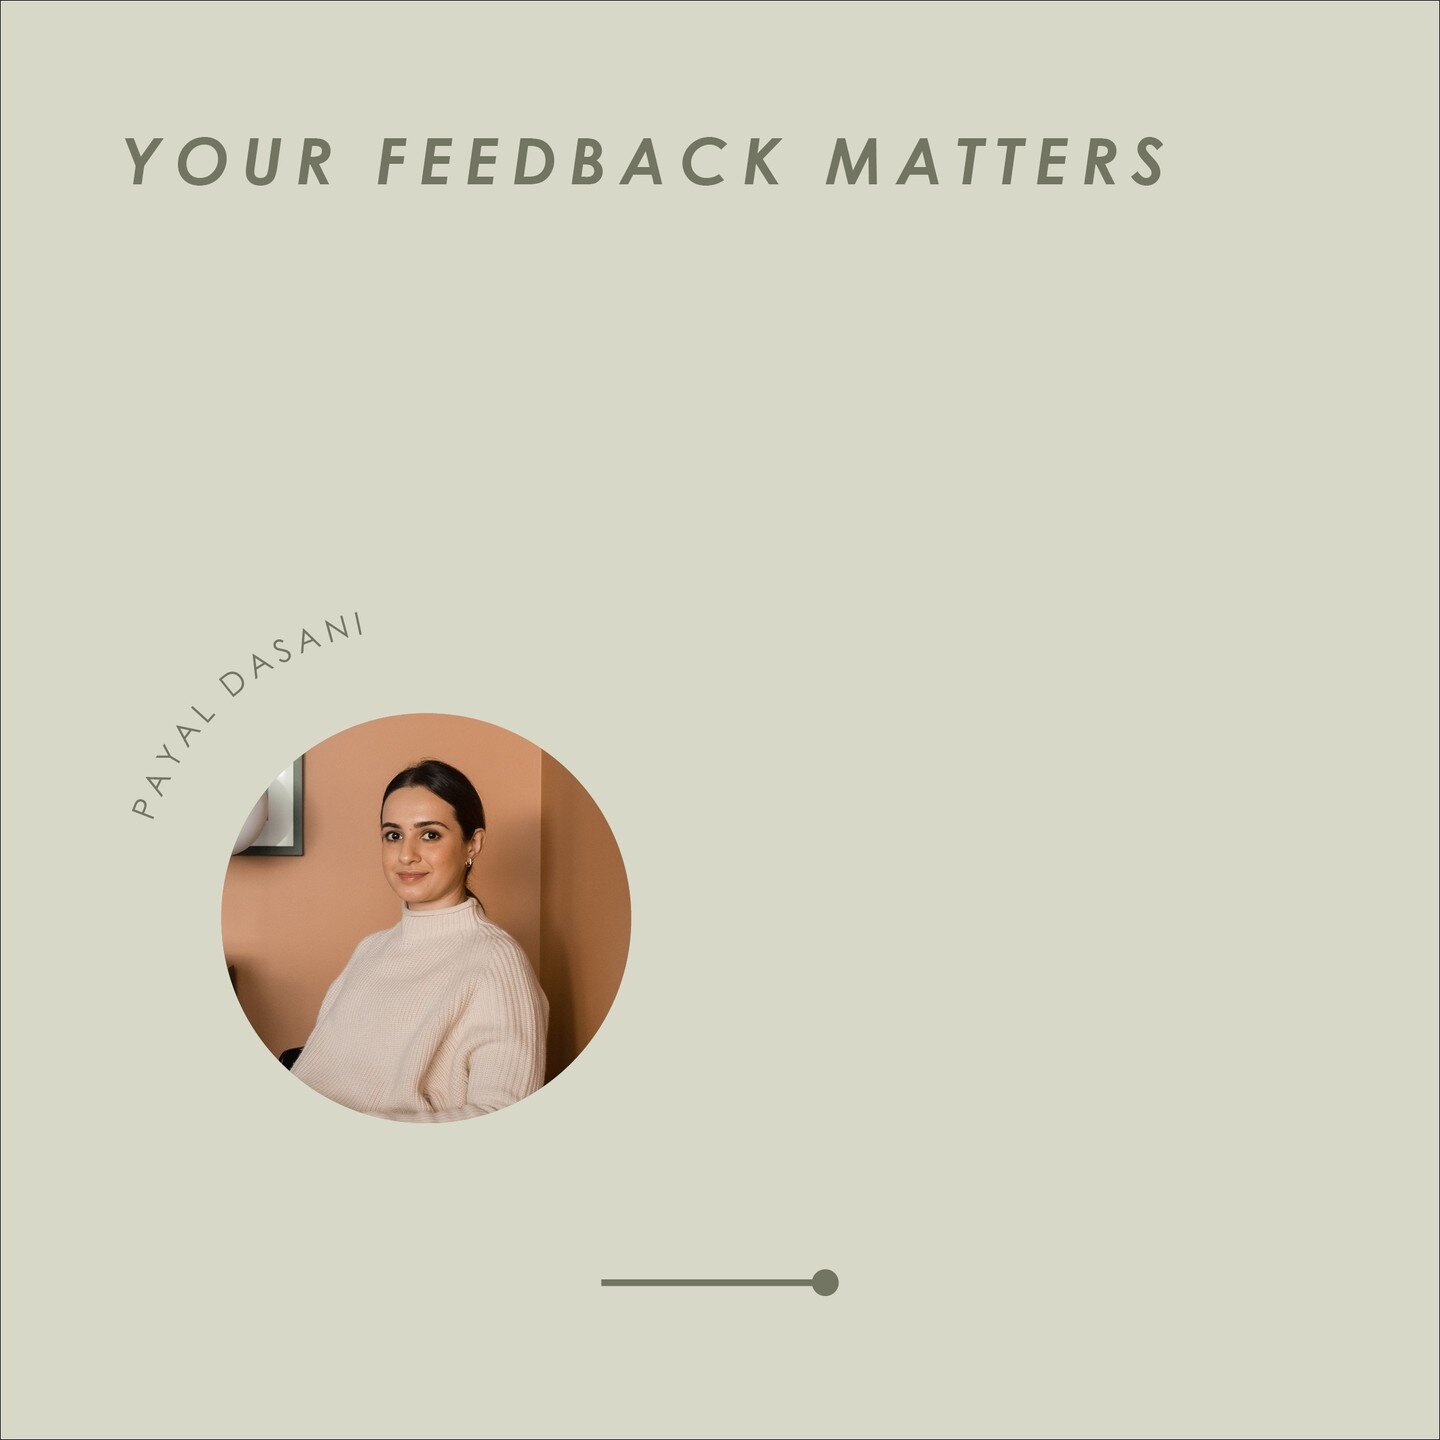 Your Feedback Matters. 

I've had to prepare about 20-30 quotes in January 🤭 - which is a lot. I am chuffed and I wanted to express my appreciation for your continued interest in my services and for considering my quotes. 

However, it takes me time